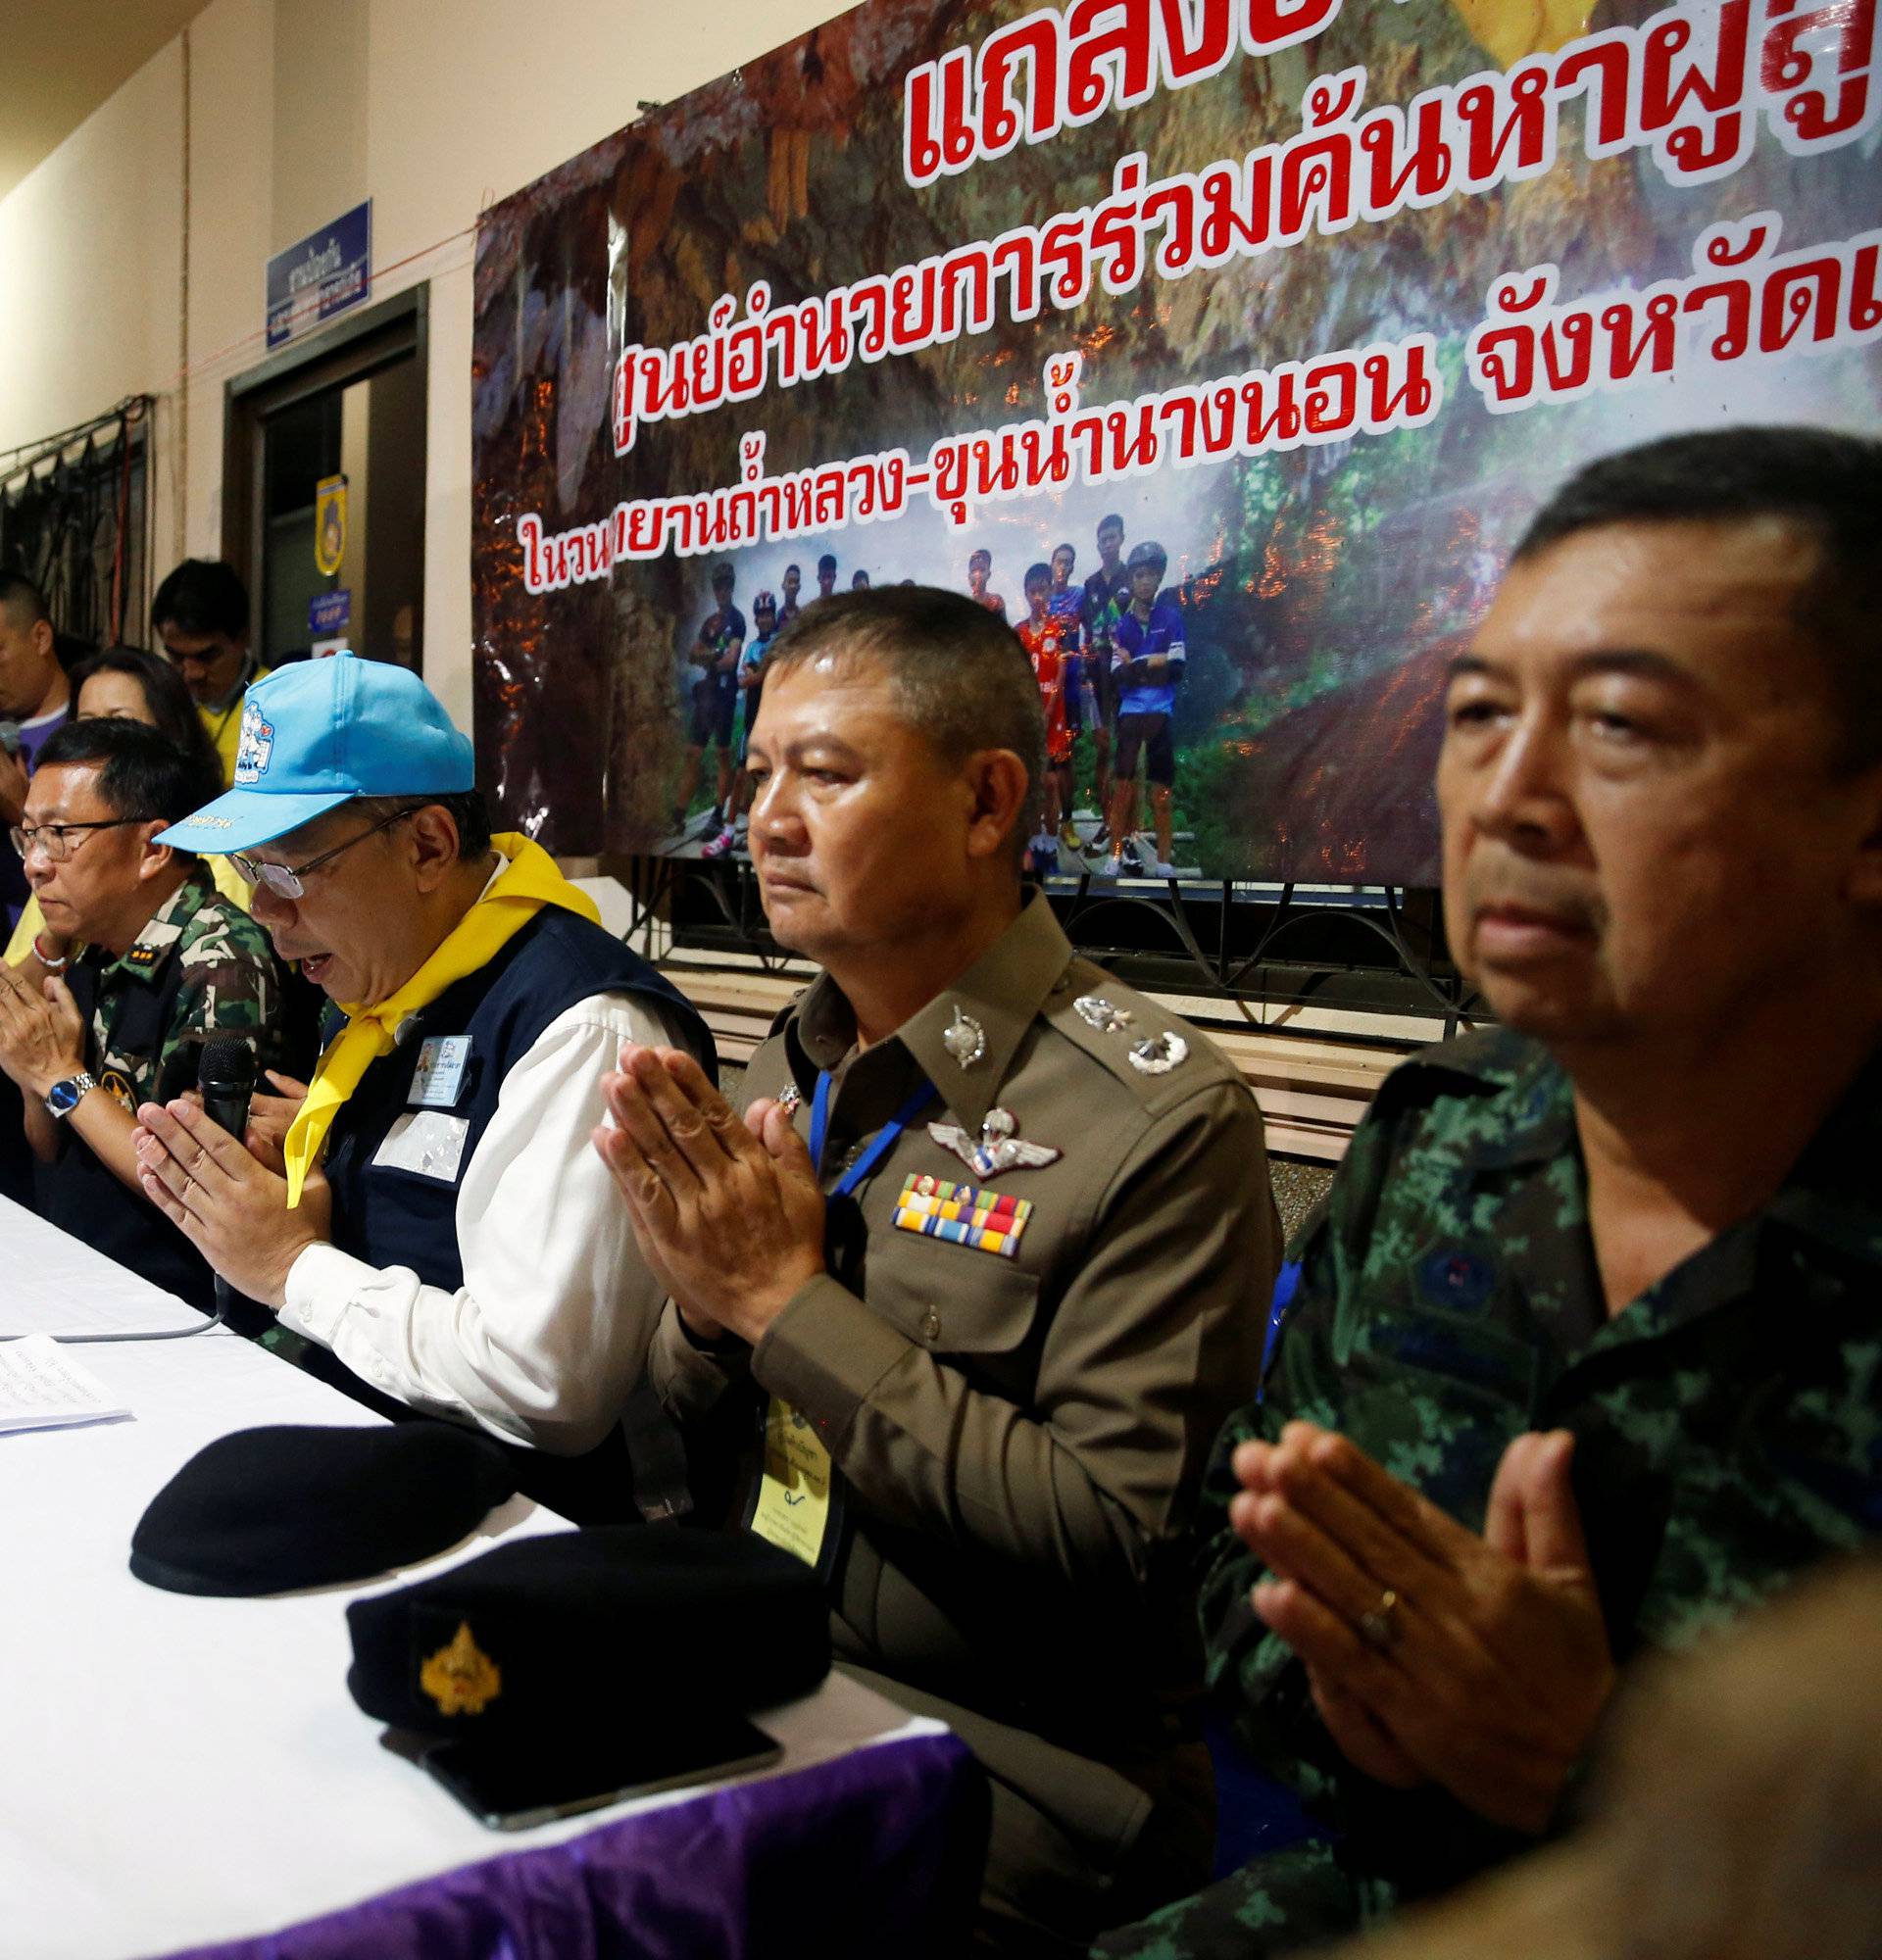 Chiang Rai province acting Gov. Narongsak Osatanakorn greets journalists during his news conference near Tham Luang cave complex in the northern province of Chiang Rai